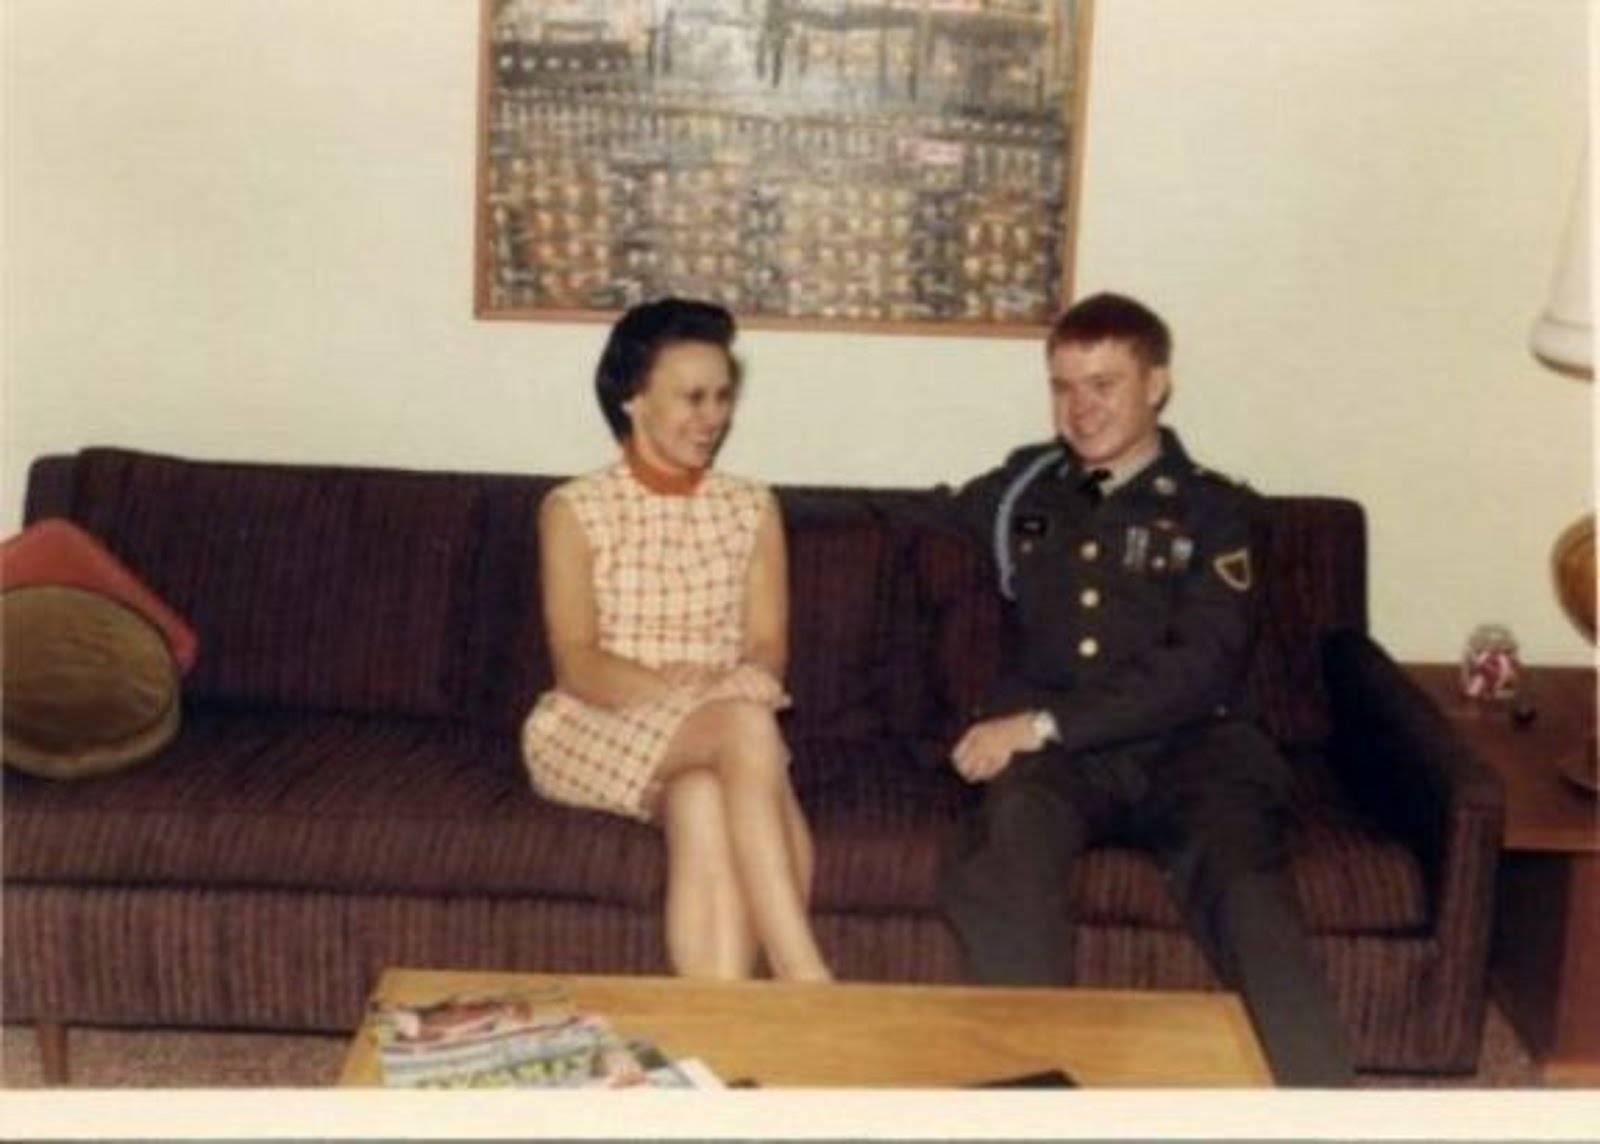 MY MOM IRENE, WITH ME IN UNIFORM ON THE NIGHT I  WAS LEAVING TO VIETNAM  ON JAN 19TH,1969